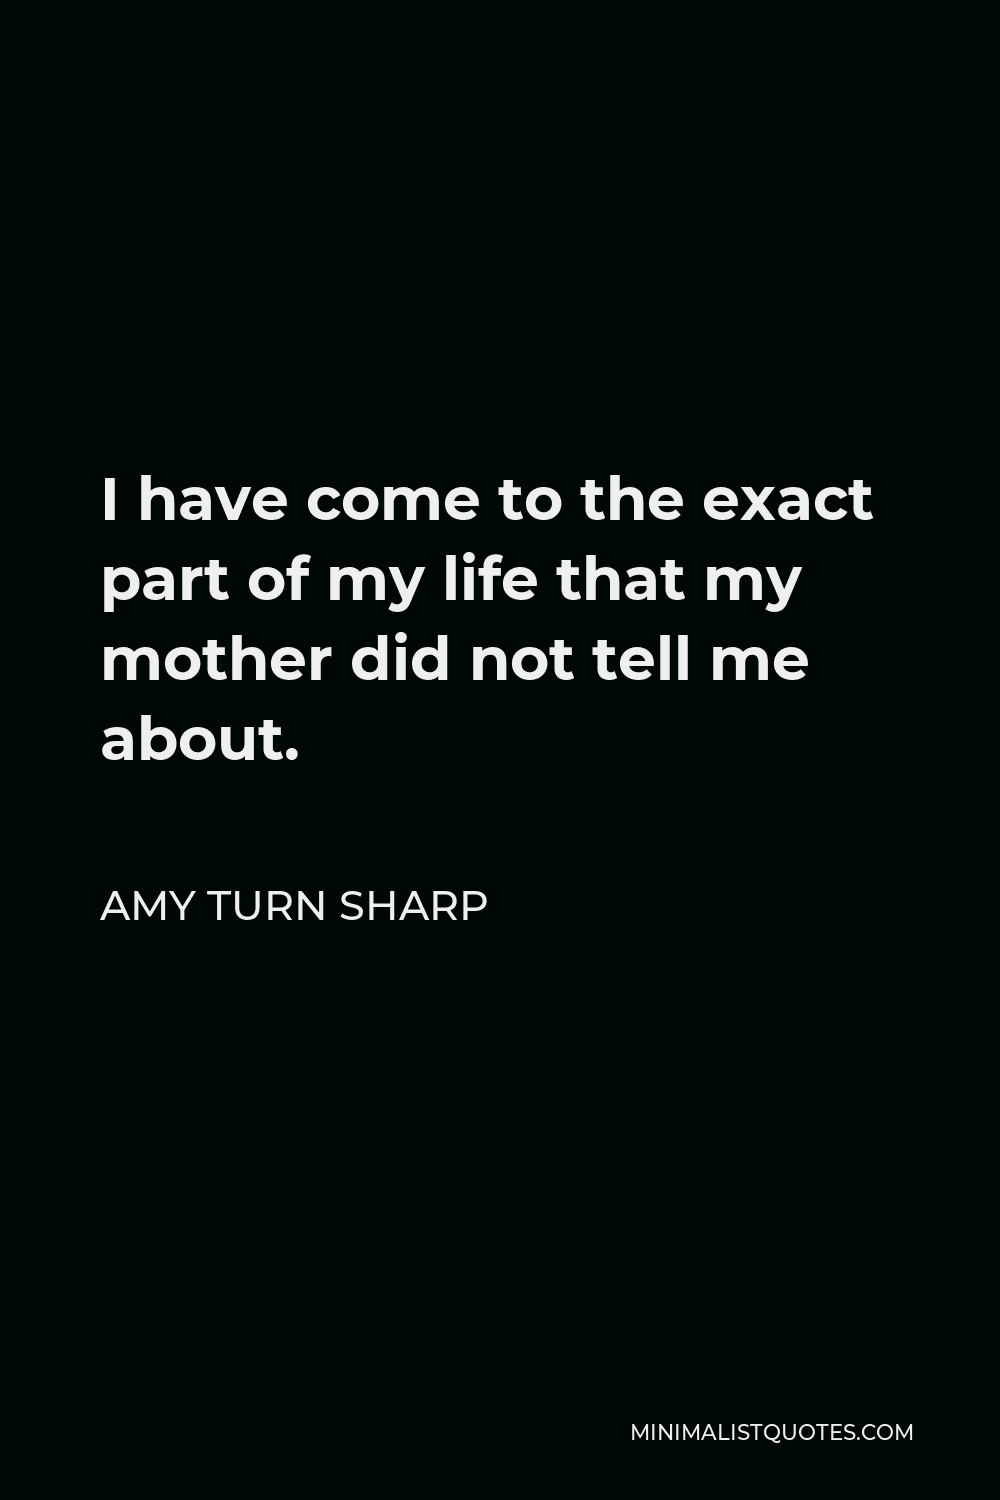 Amy Turn Sharp Quote - I have come to the exact part of my life that my mother did not tell me about.